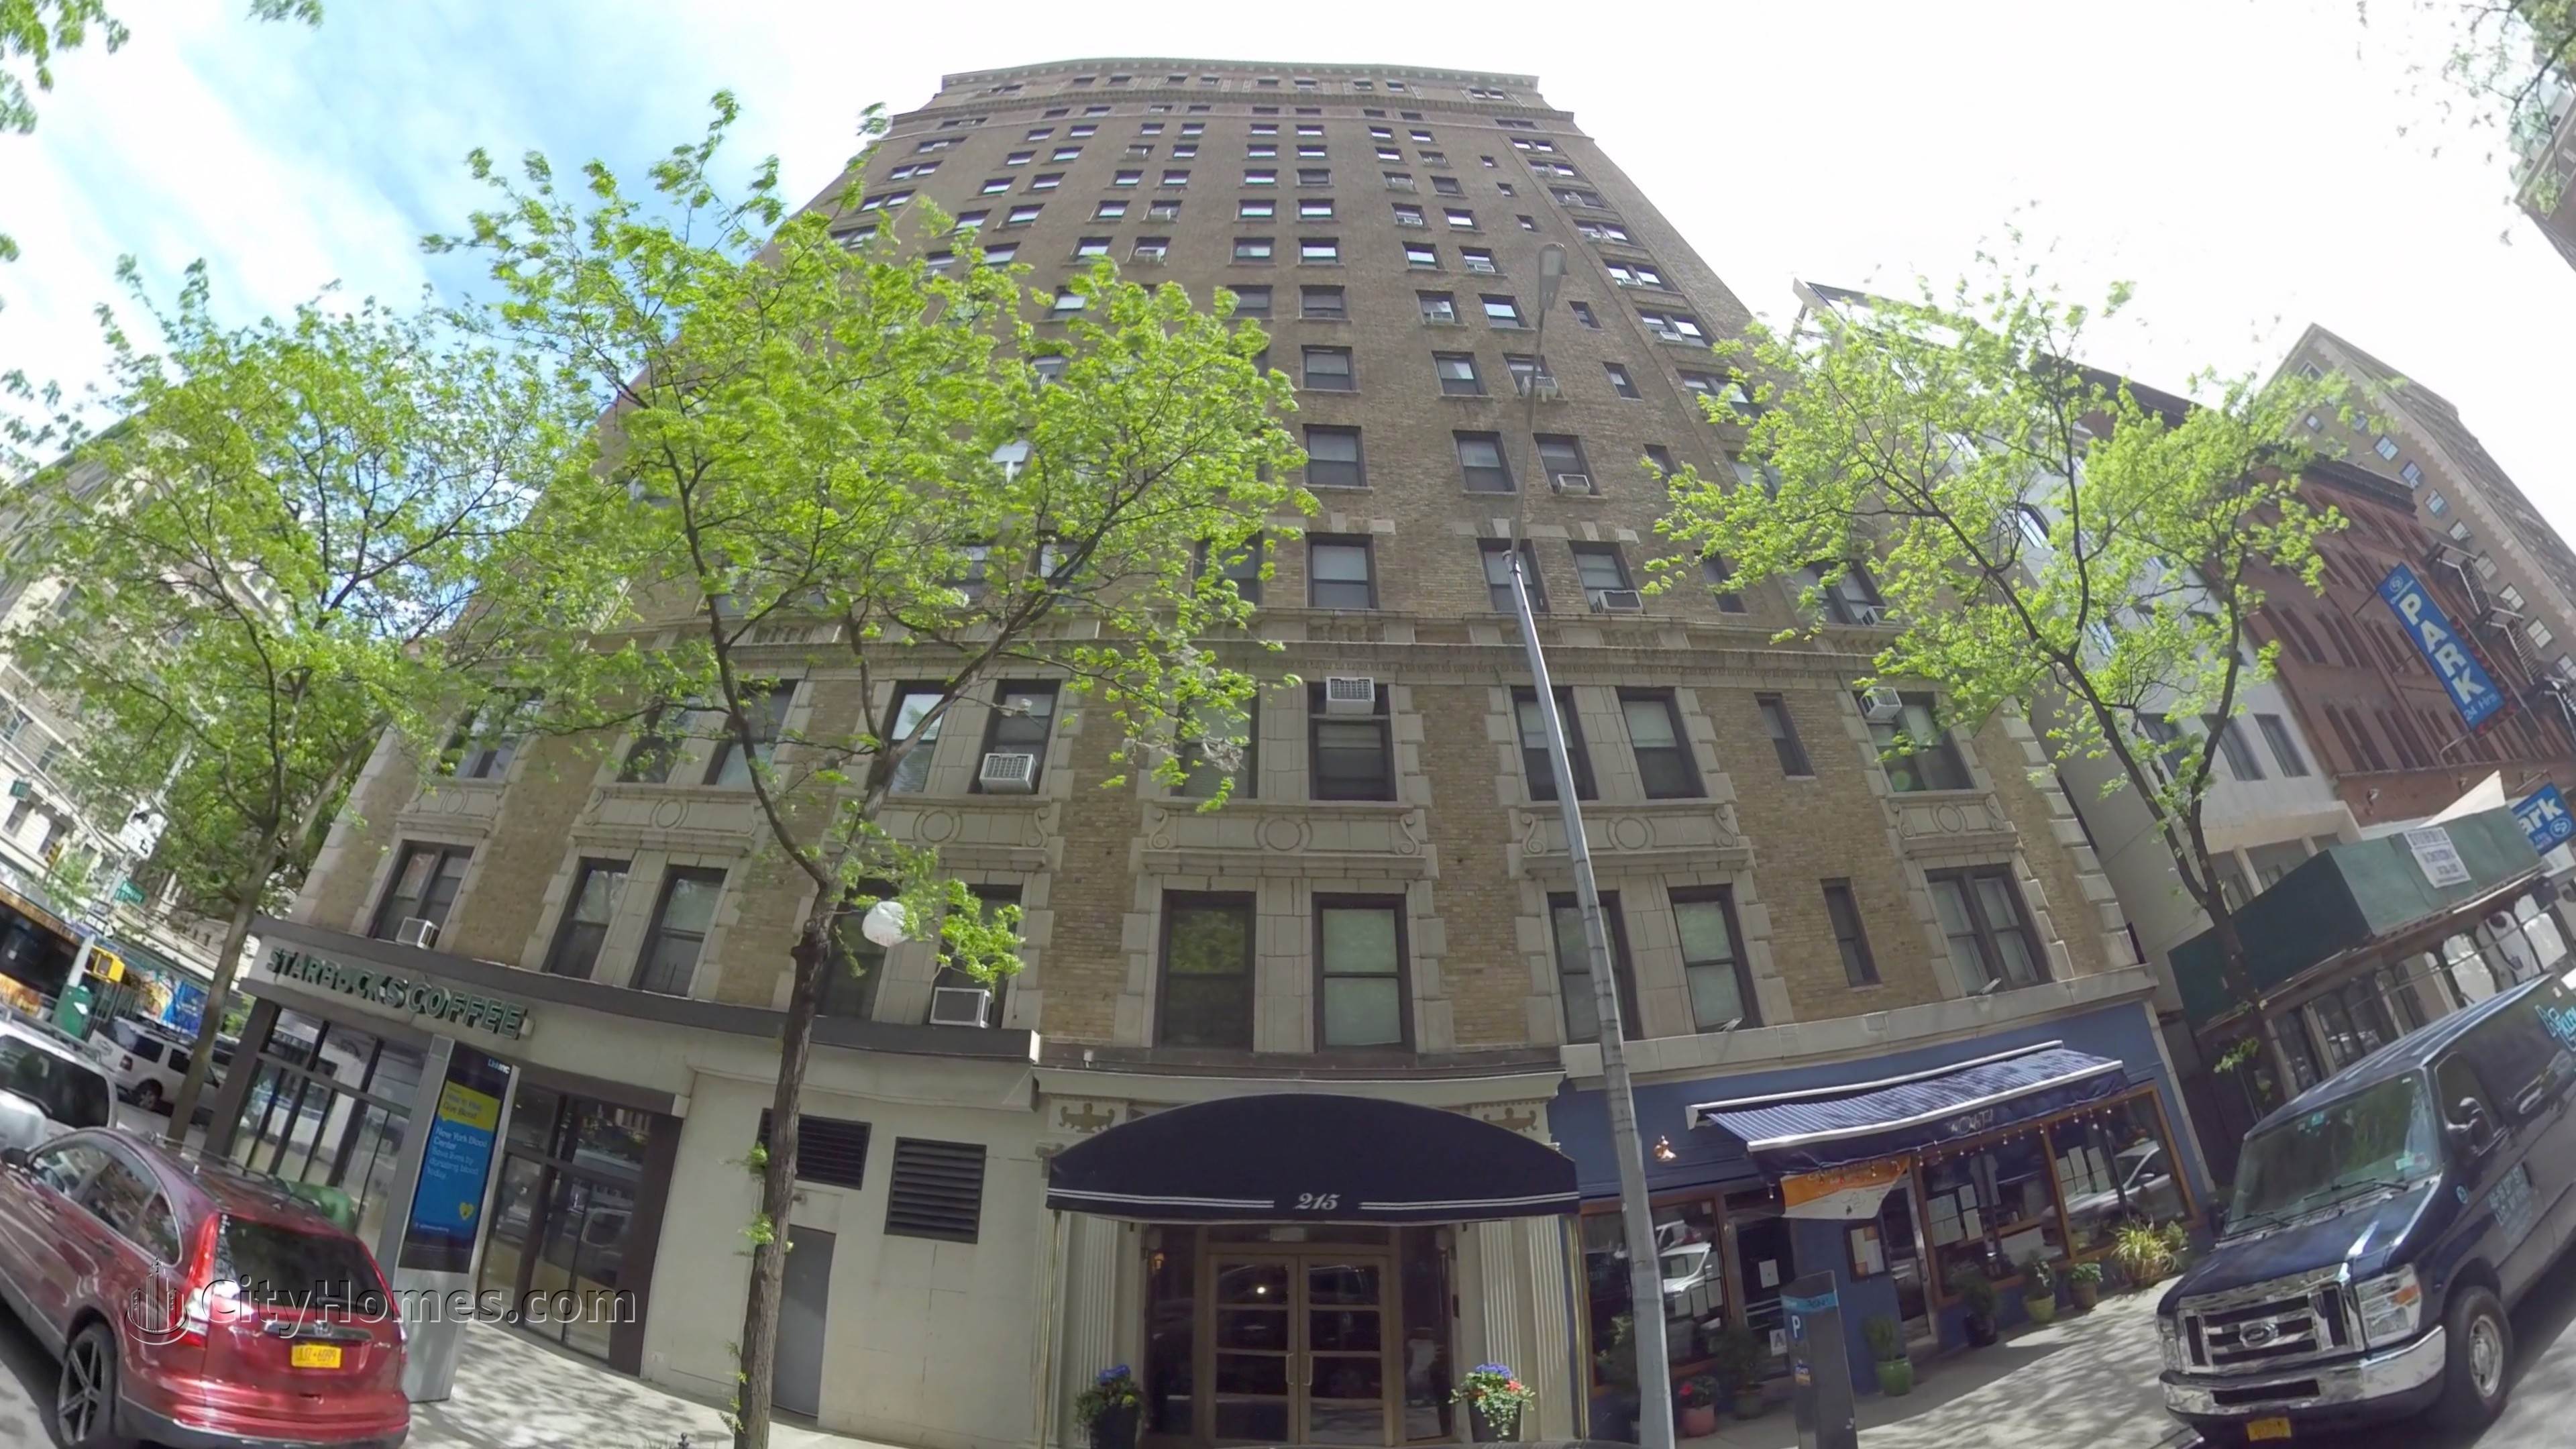 Majestic Towers building at 215 West 75th Street, Upper West Side, Manhattan, NY 10023